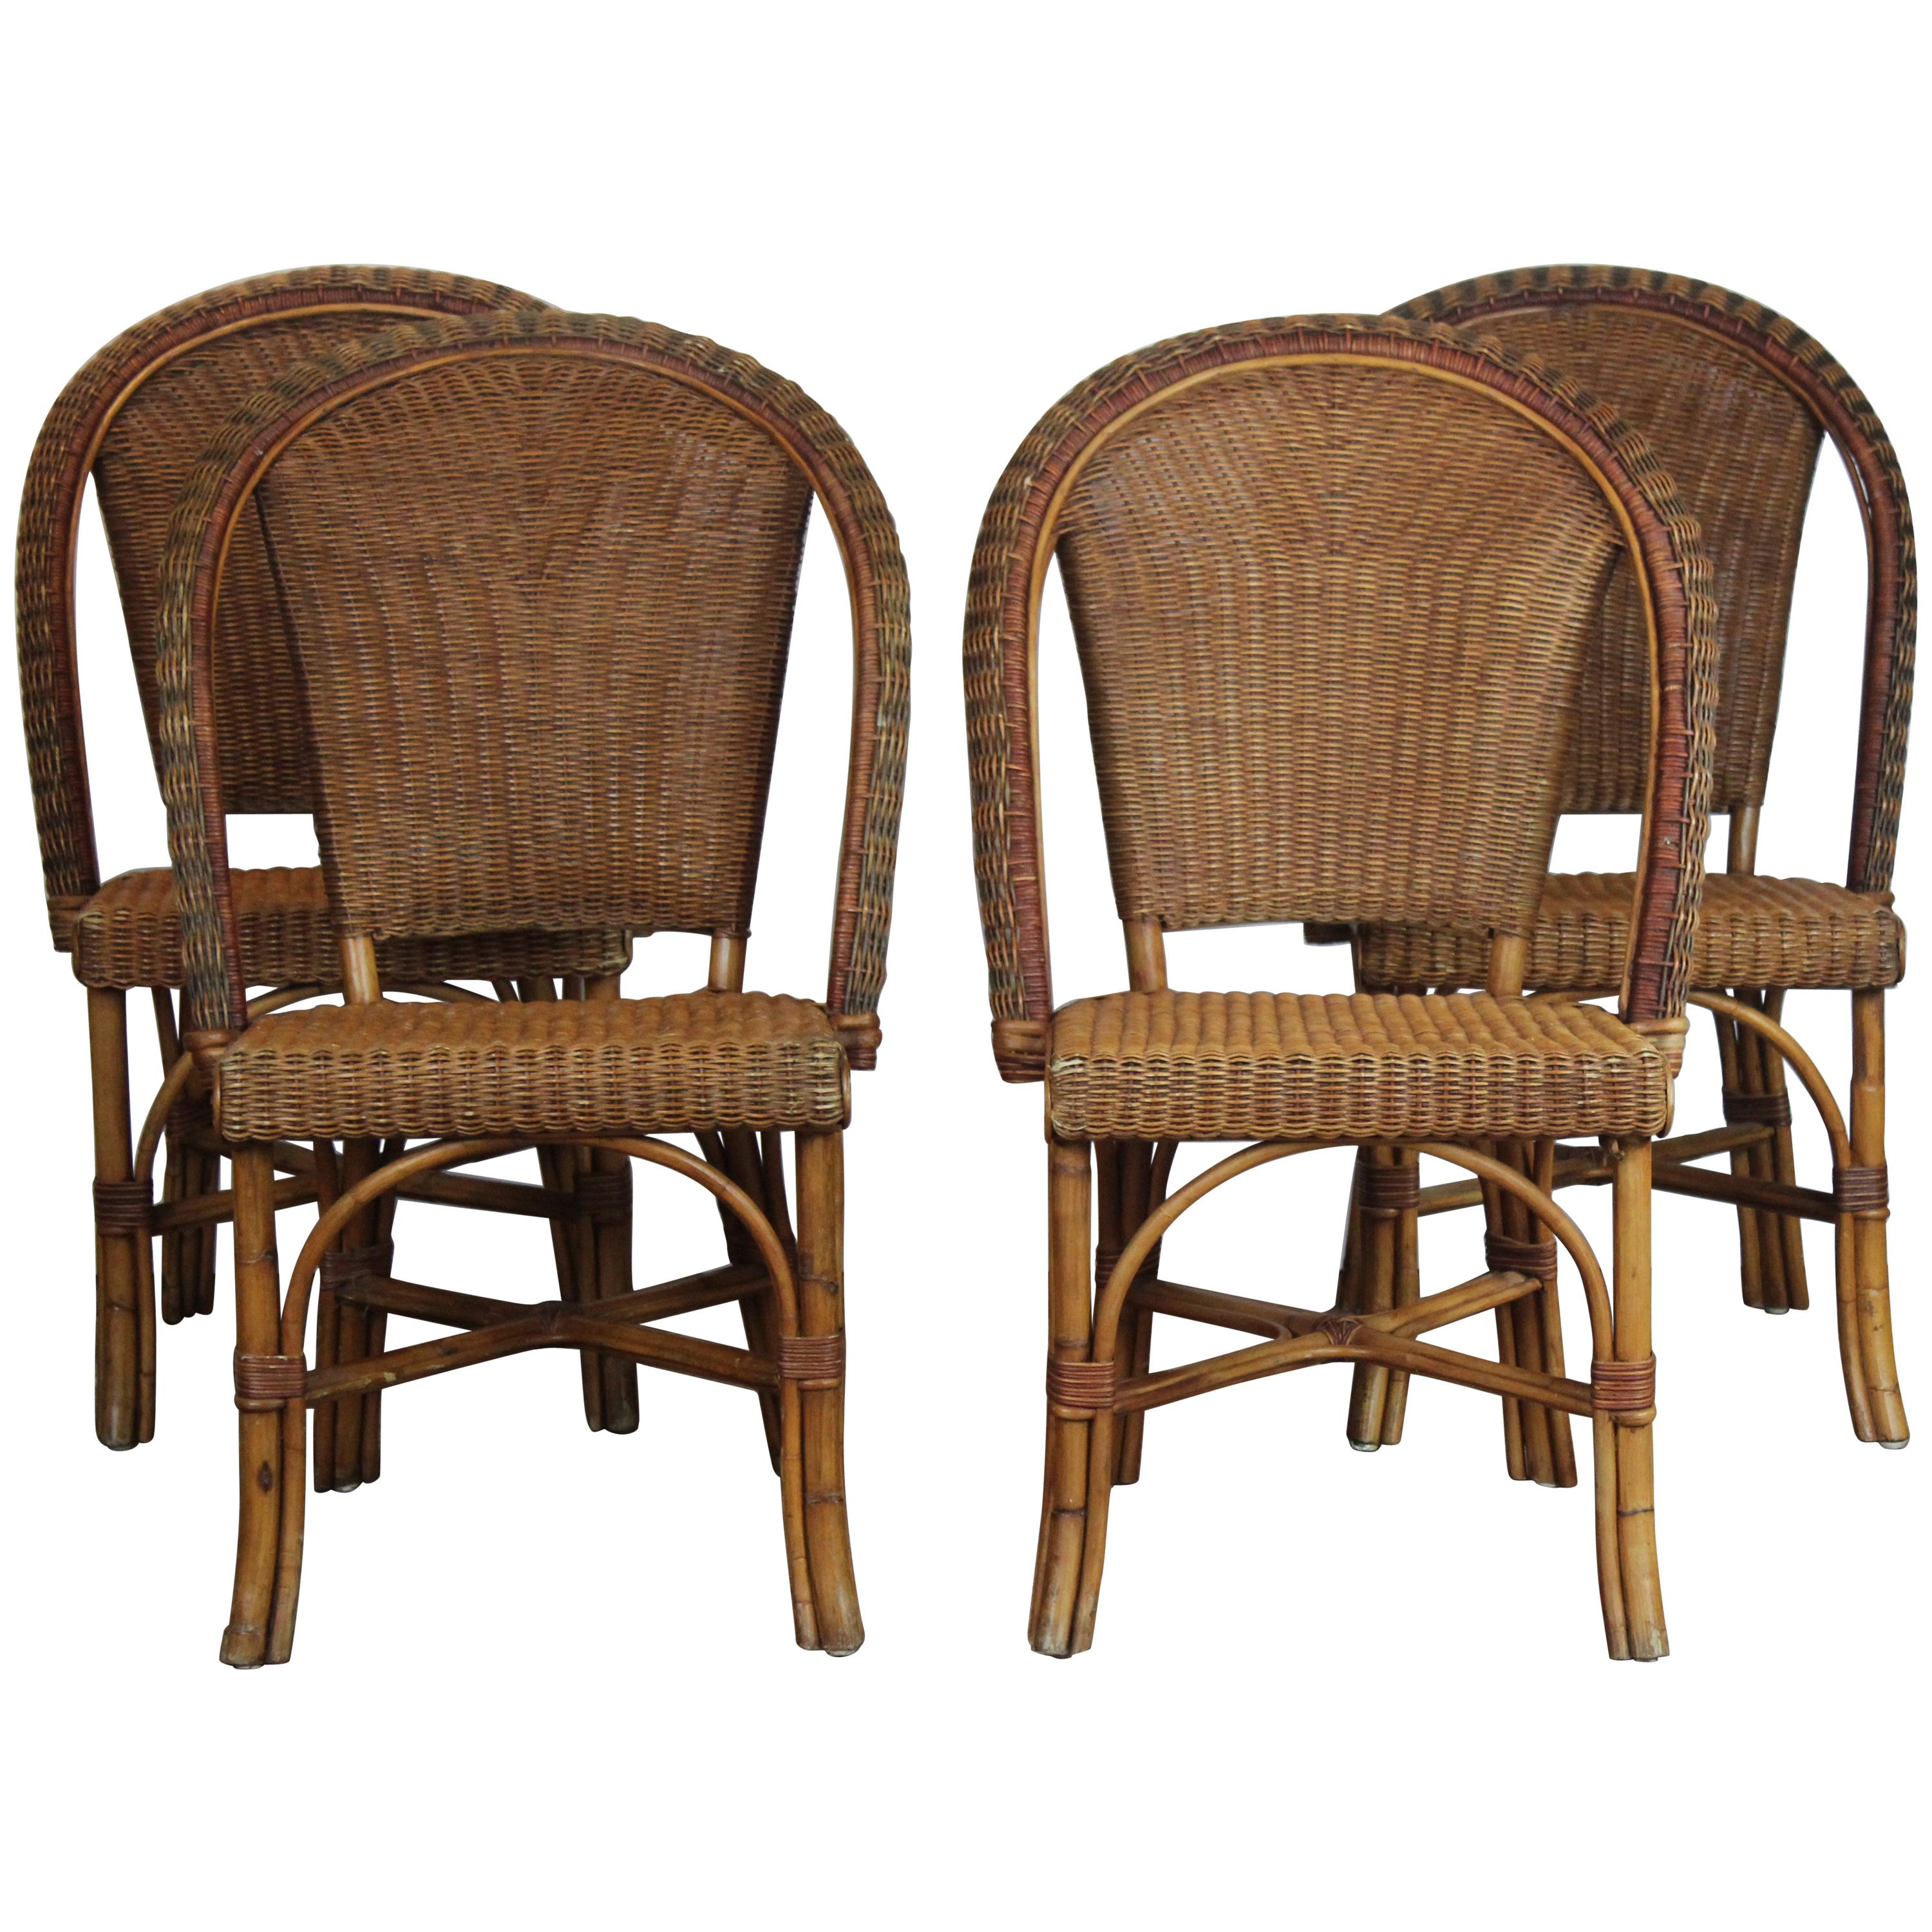 Set of 4 Rattan Chairs